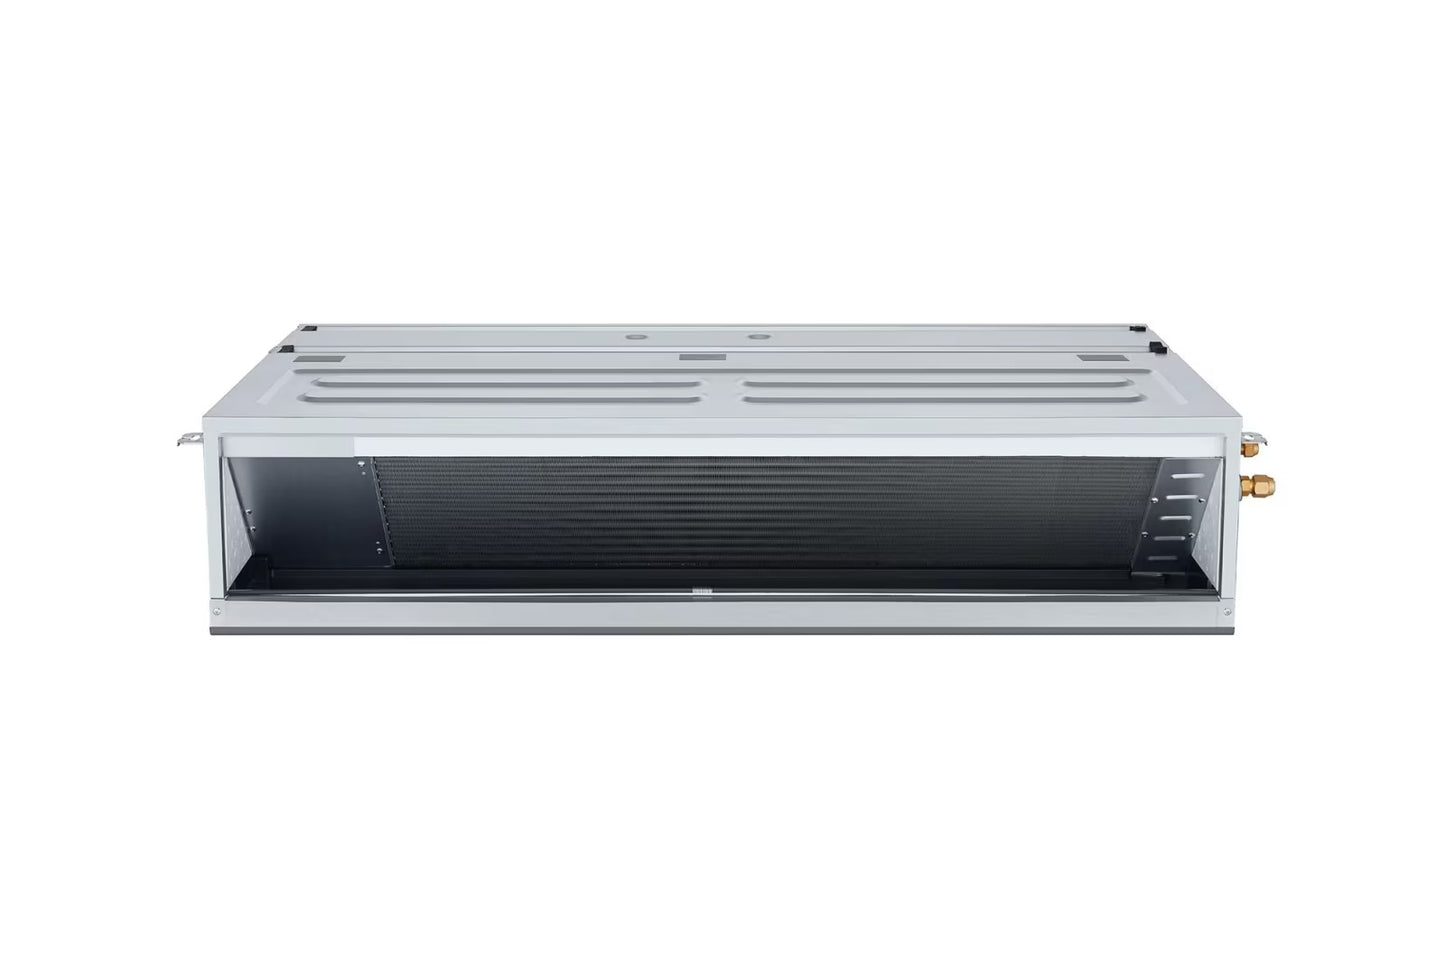 LG Ceiling Concealed Duct INV Unit 3.6KW with Mid Static and E.S.P. Control for Multiple Rooms - ARNU12GM1A4